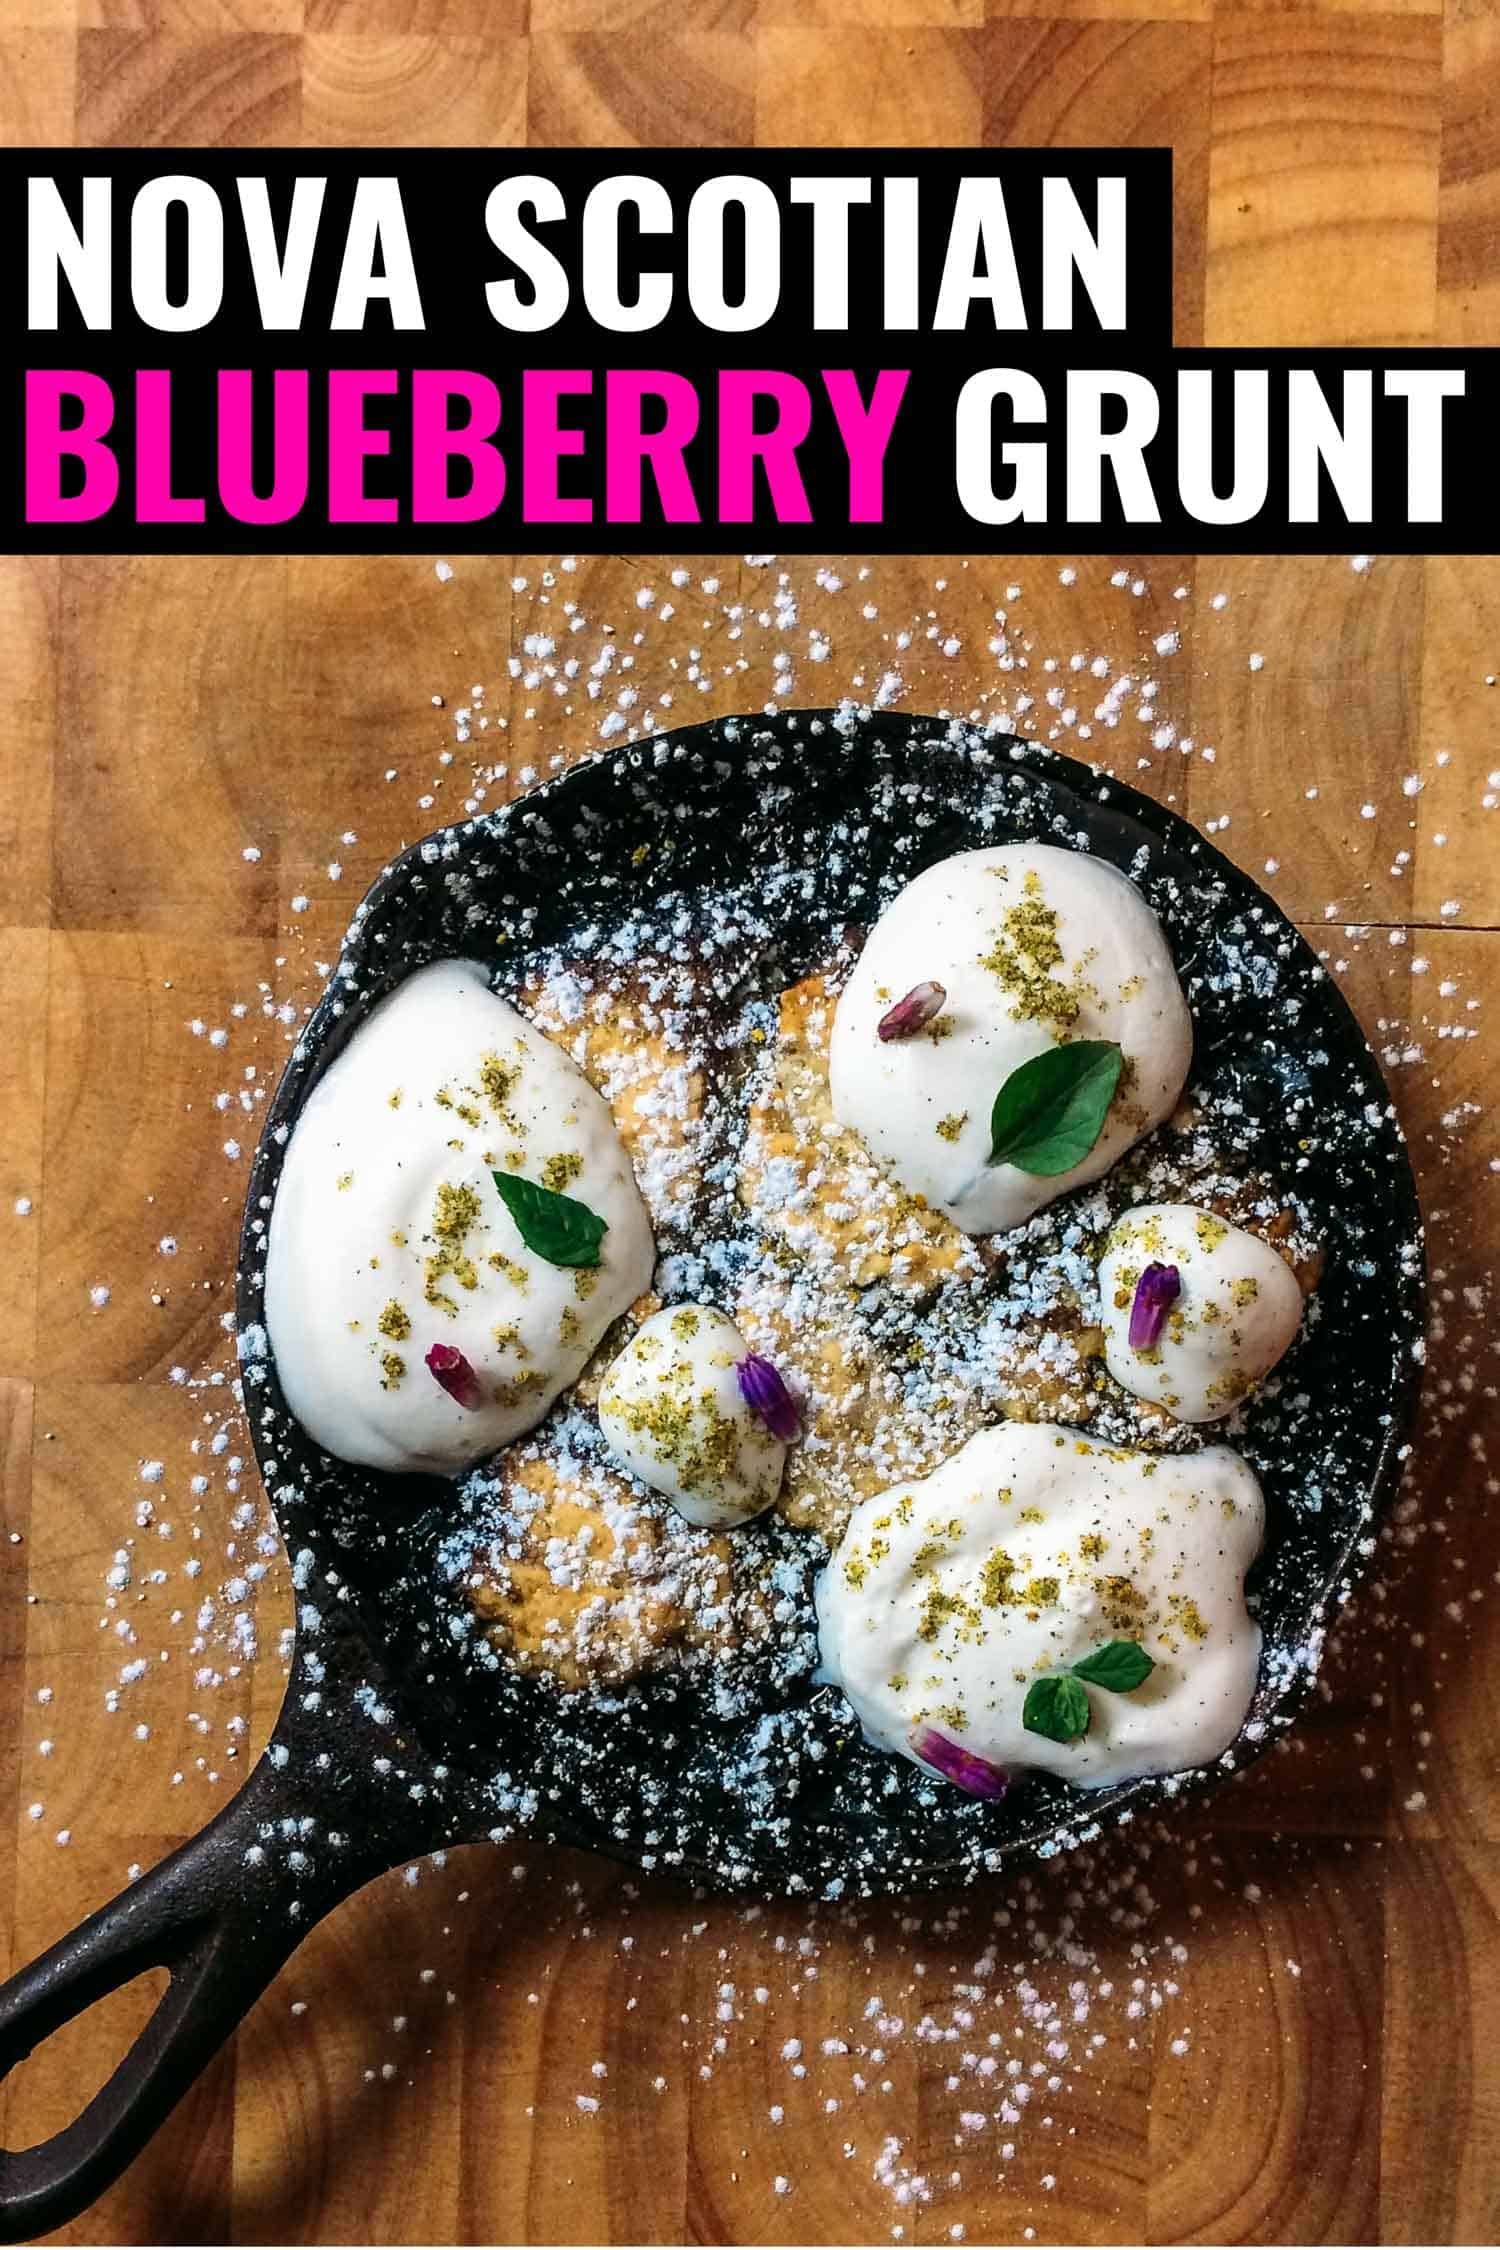 Blueberry grunt in a cast iron pan